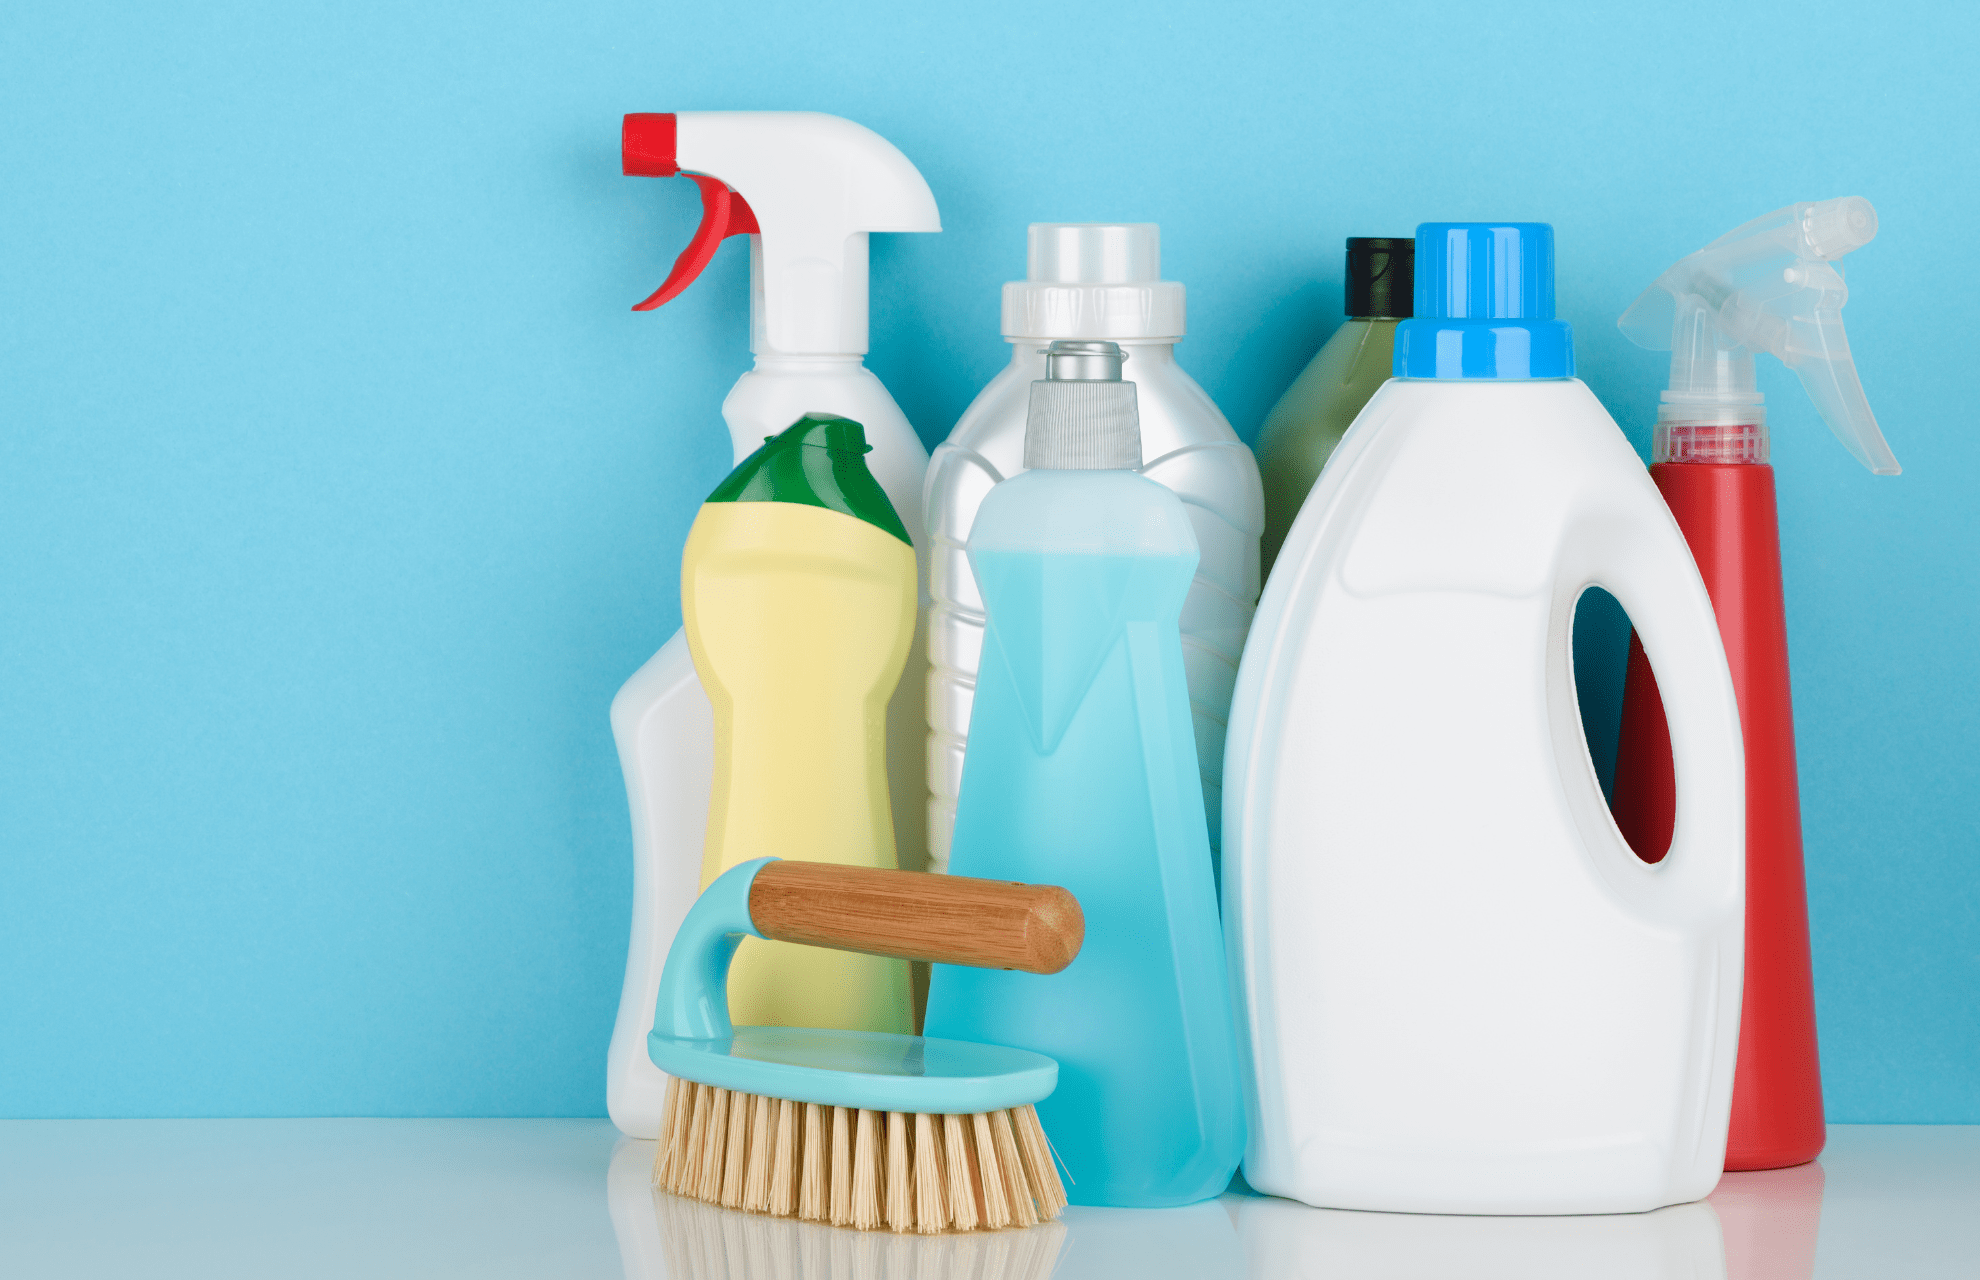 Household detergents